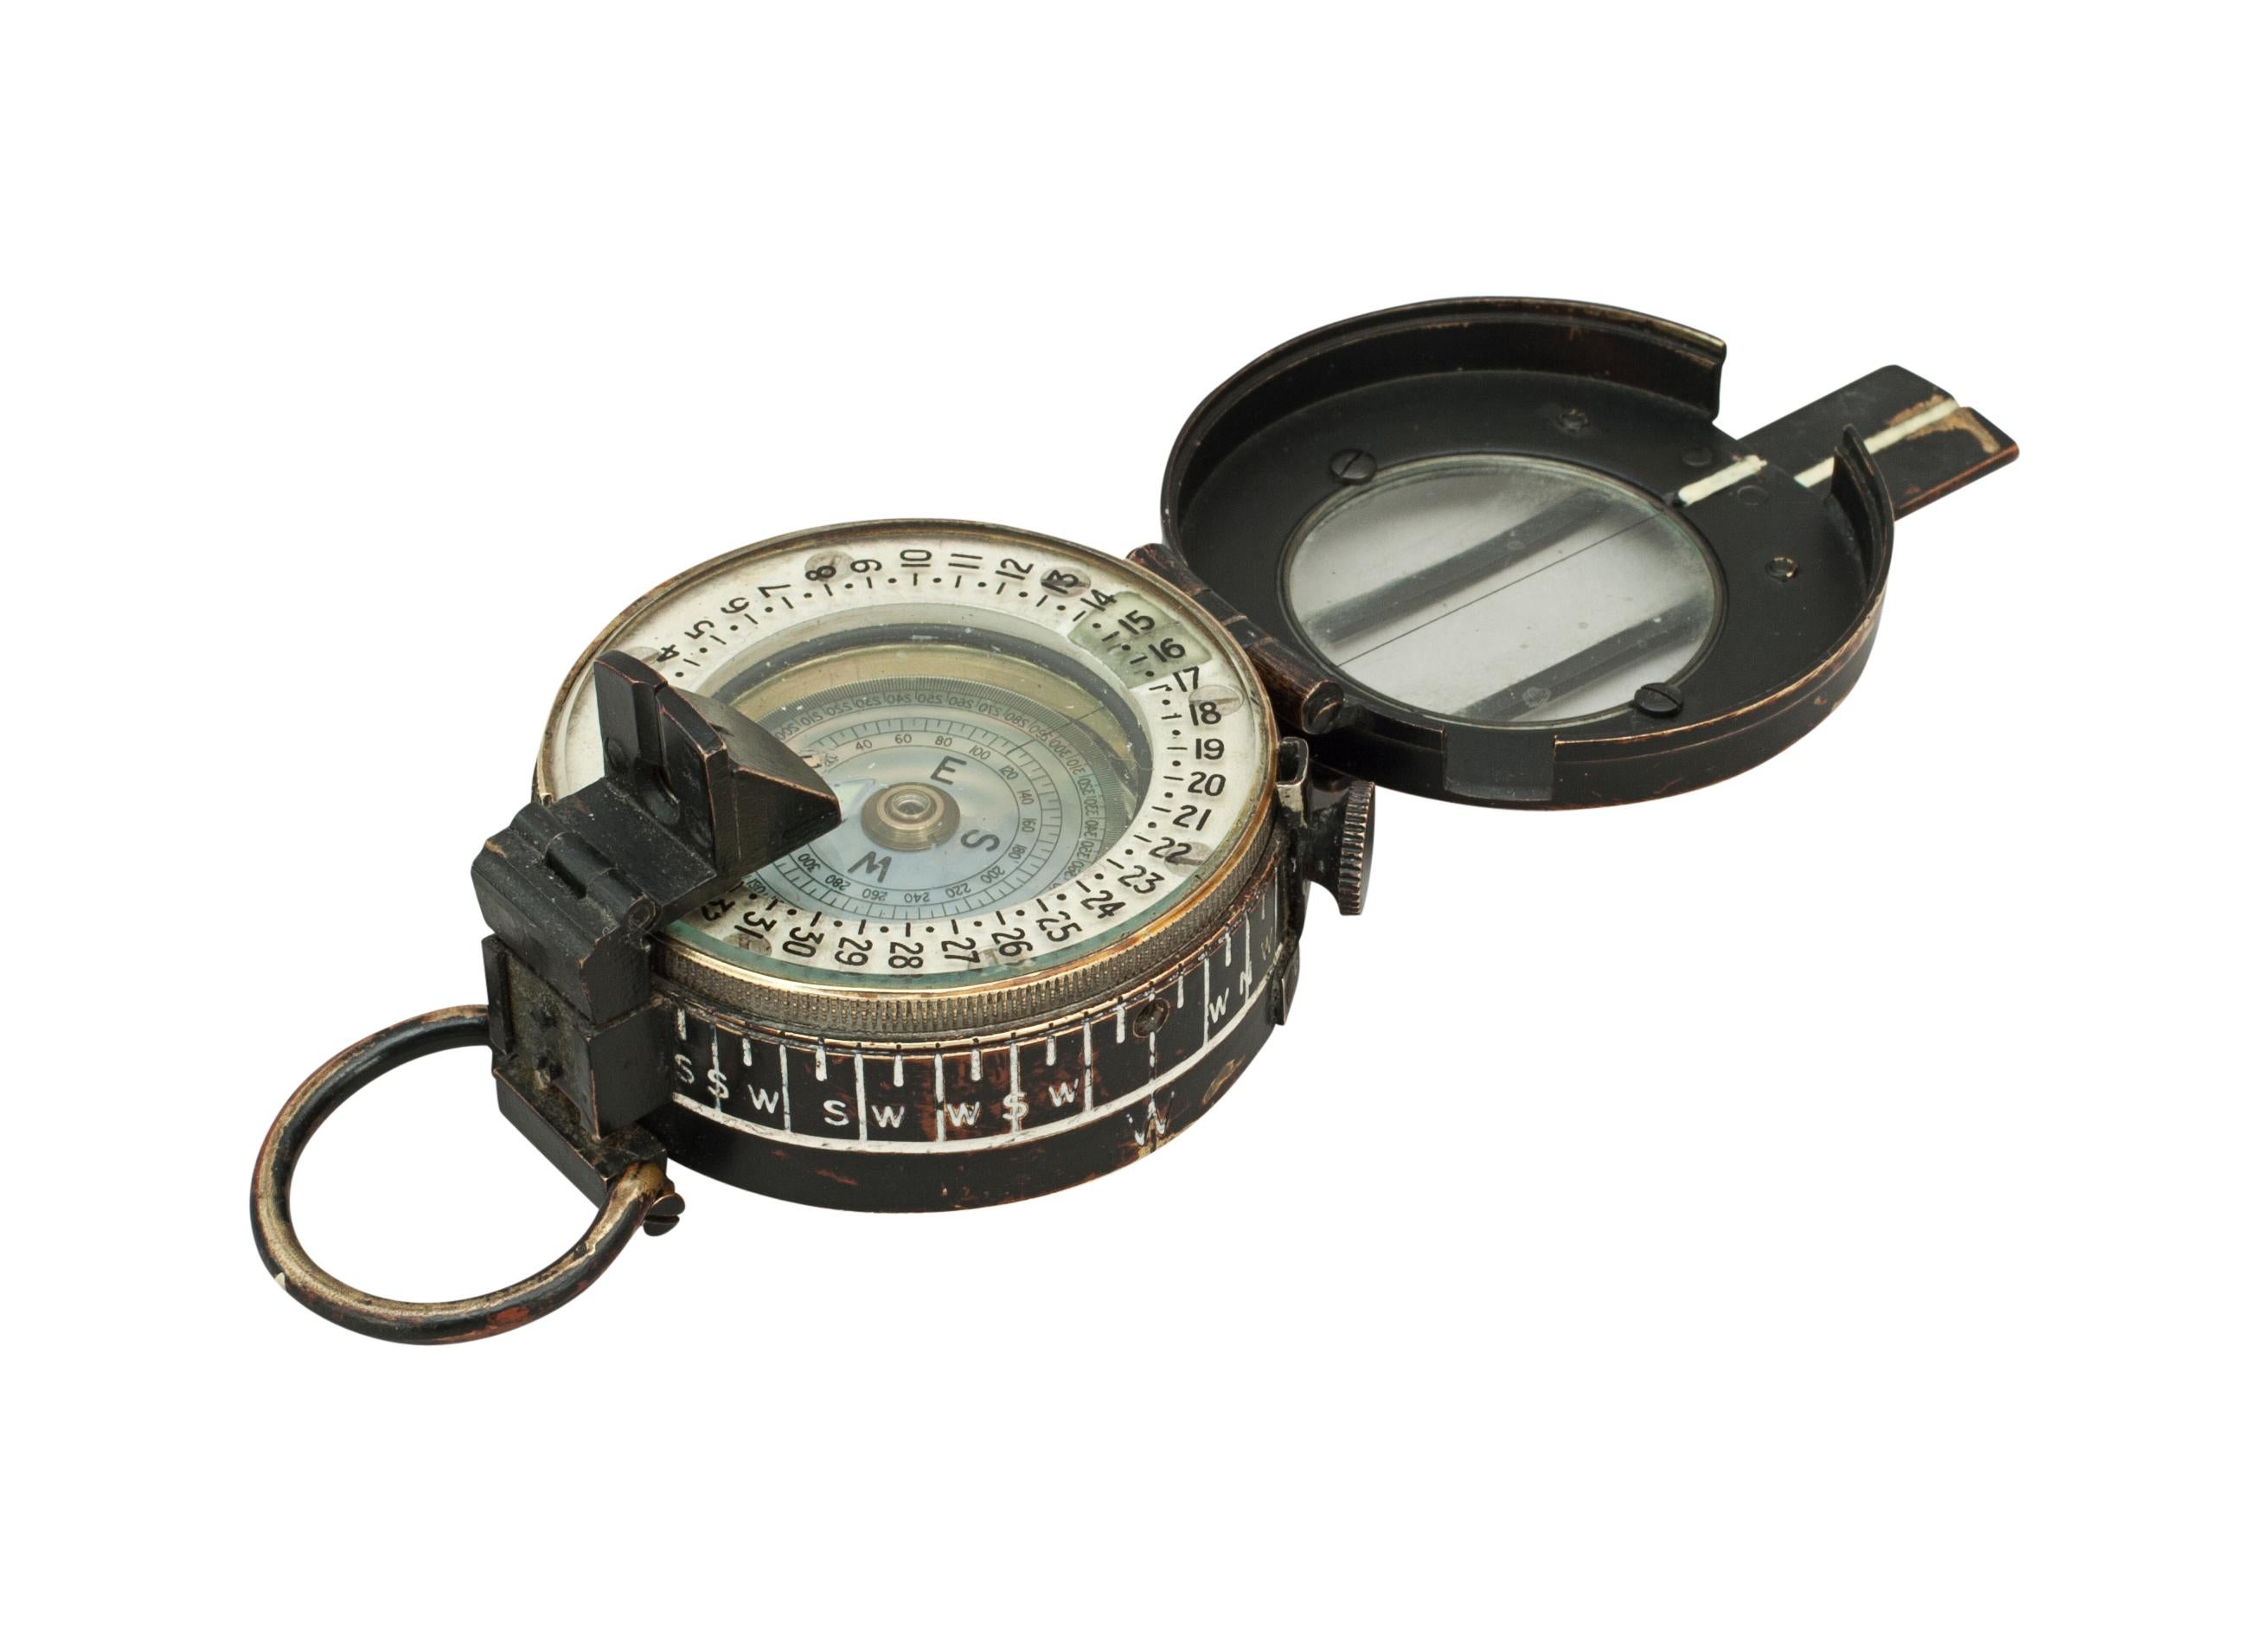 Canadian Kodak Company prismatic Mk.III compass
The World War II compass has a brass body and lid with original black finish, the glass lid having a sighting hairline and the lid lifting tab with aiming notch. There is a prism which allows you to